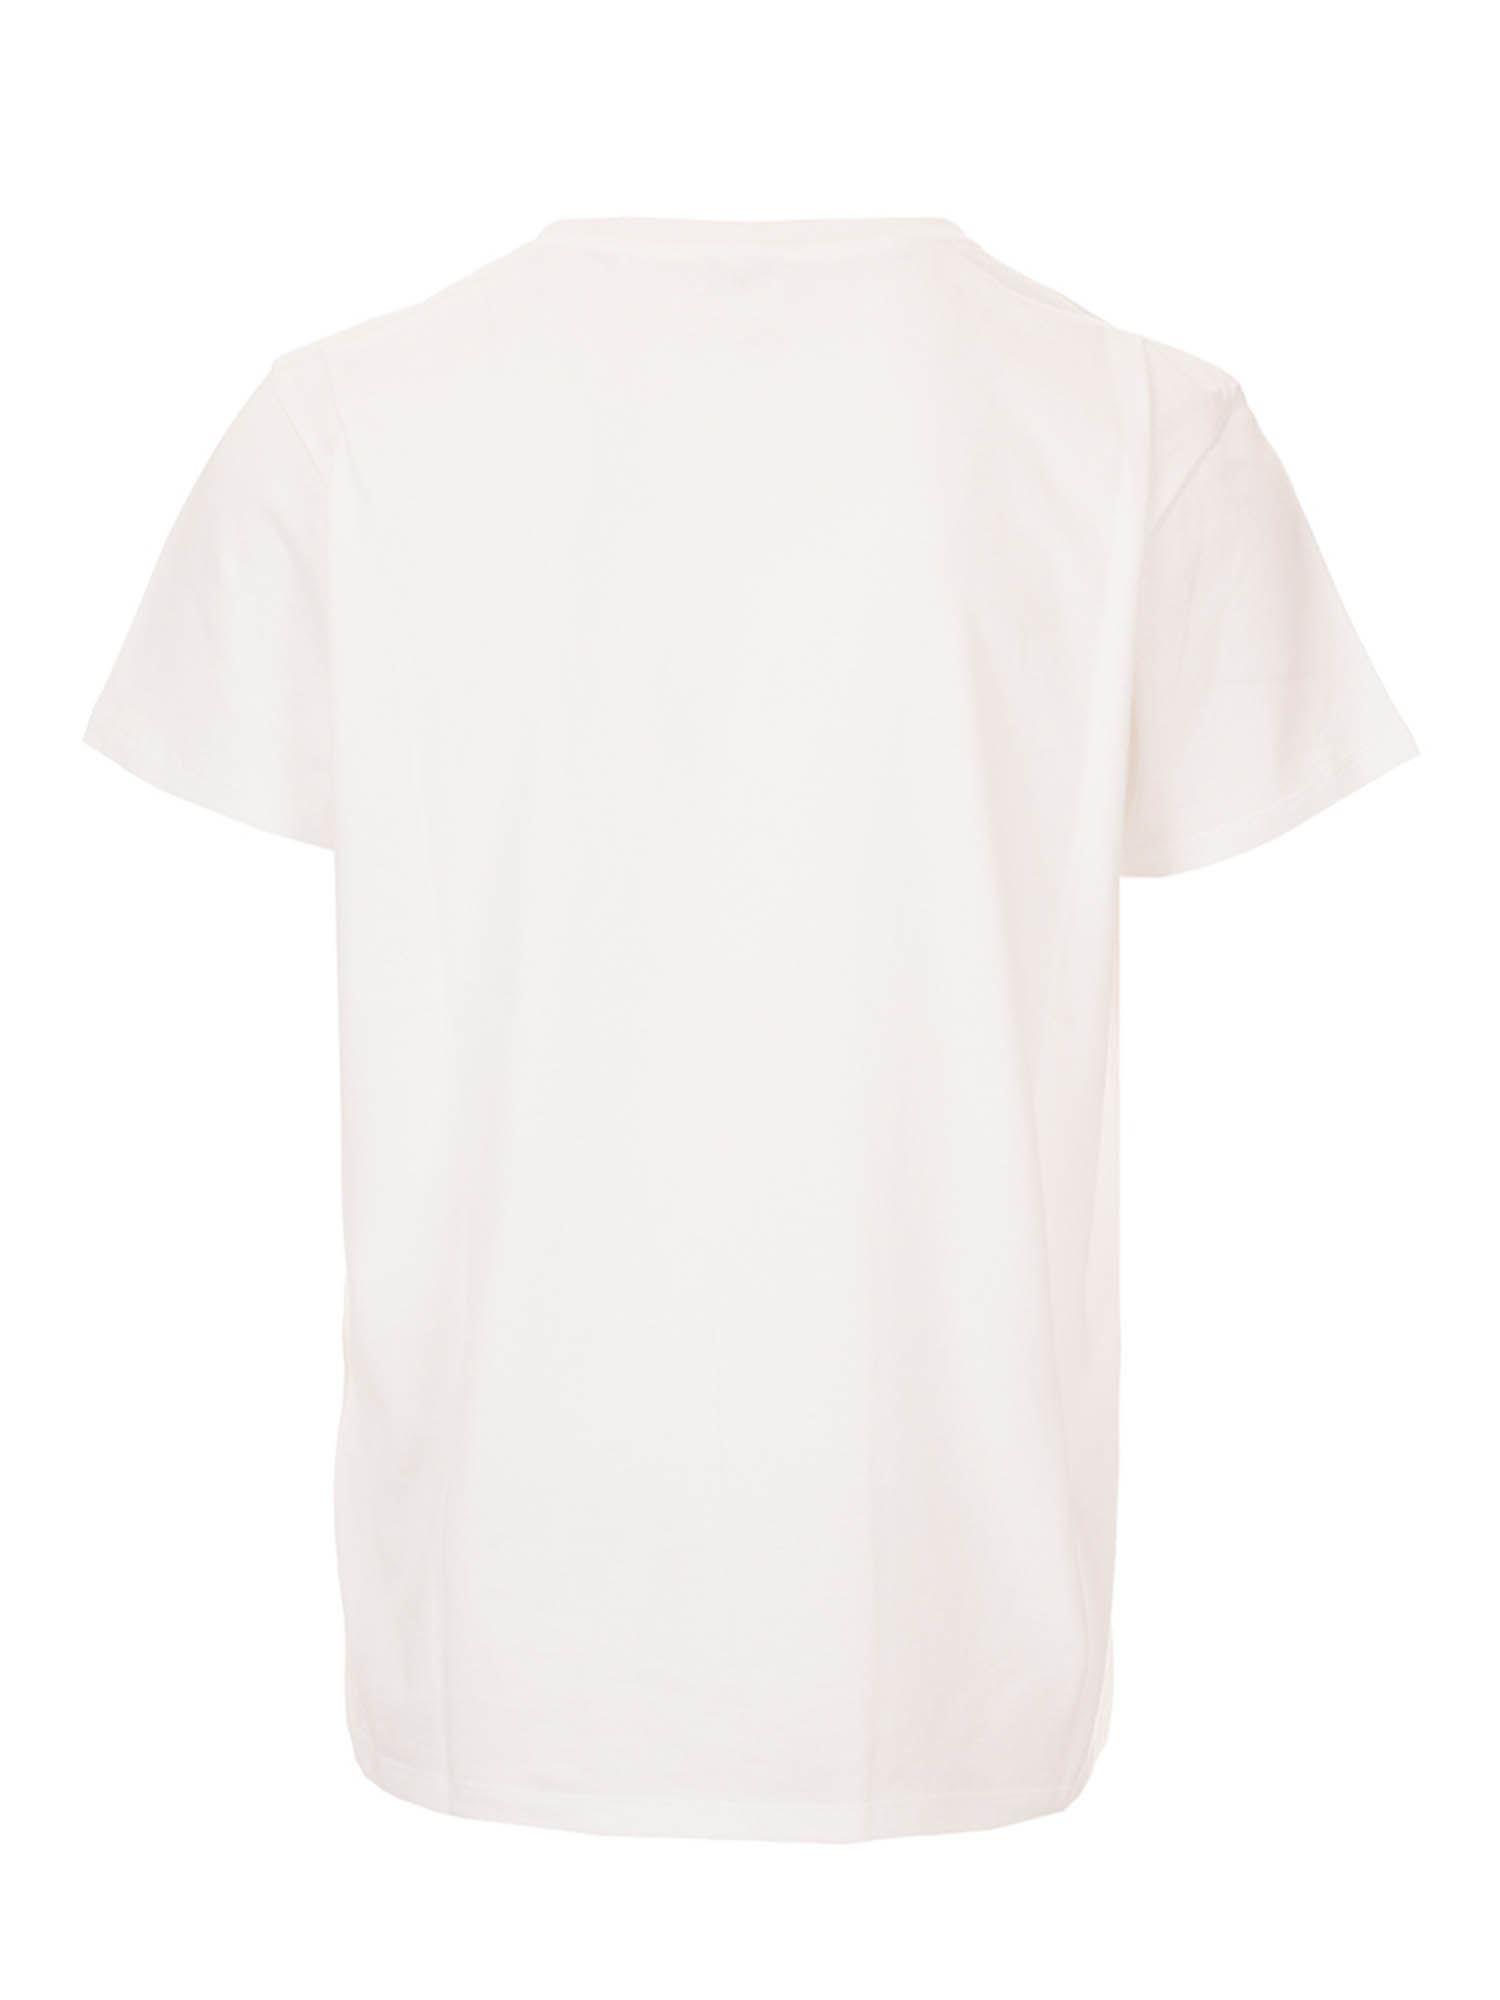 Celine Cotton White T-shirt With Embroidery for Men - Lyst